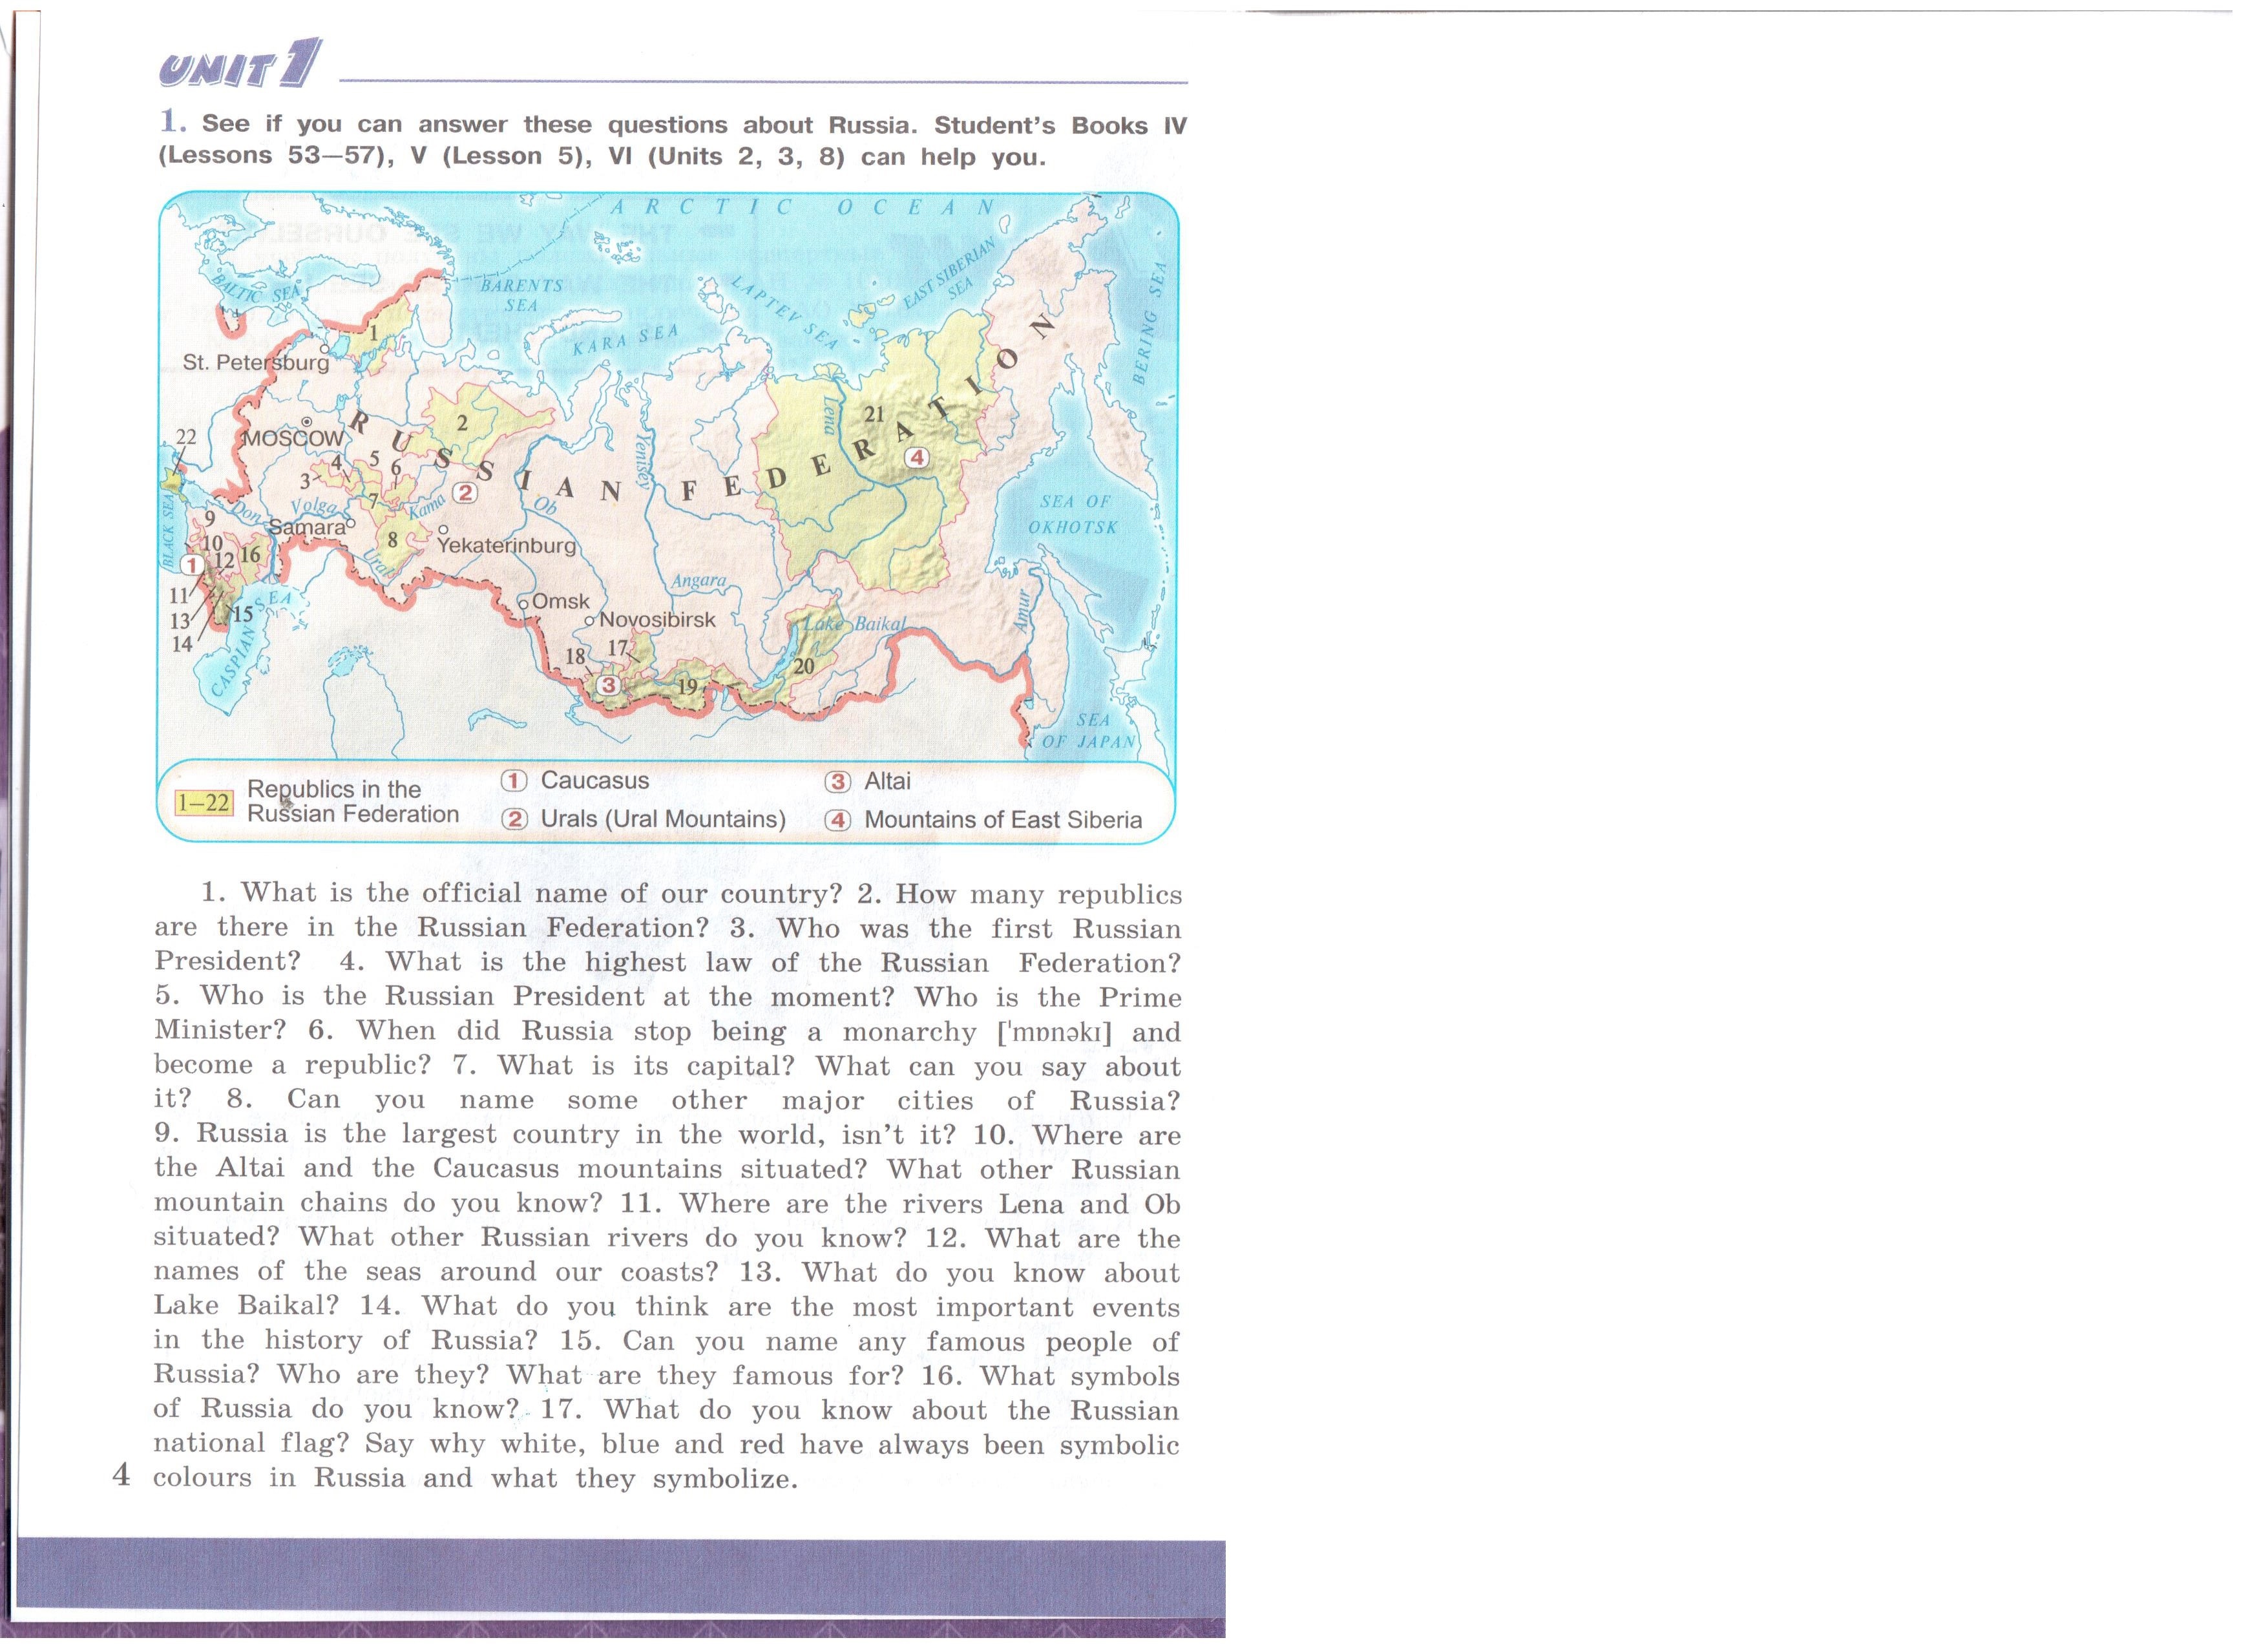 Where are the Urals situated ответы на вопросы.